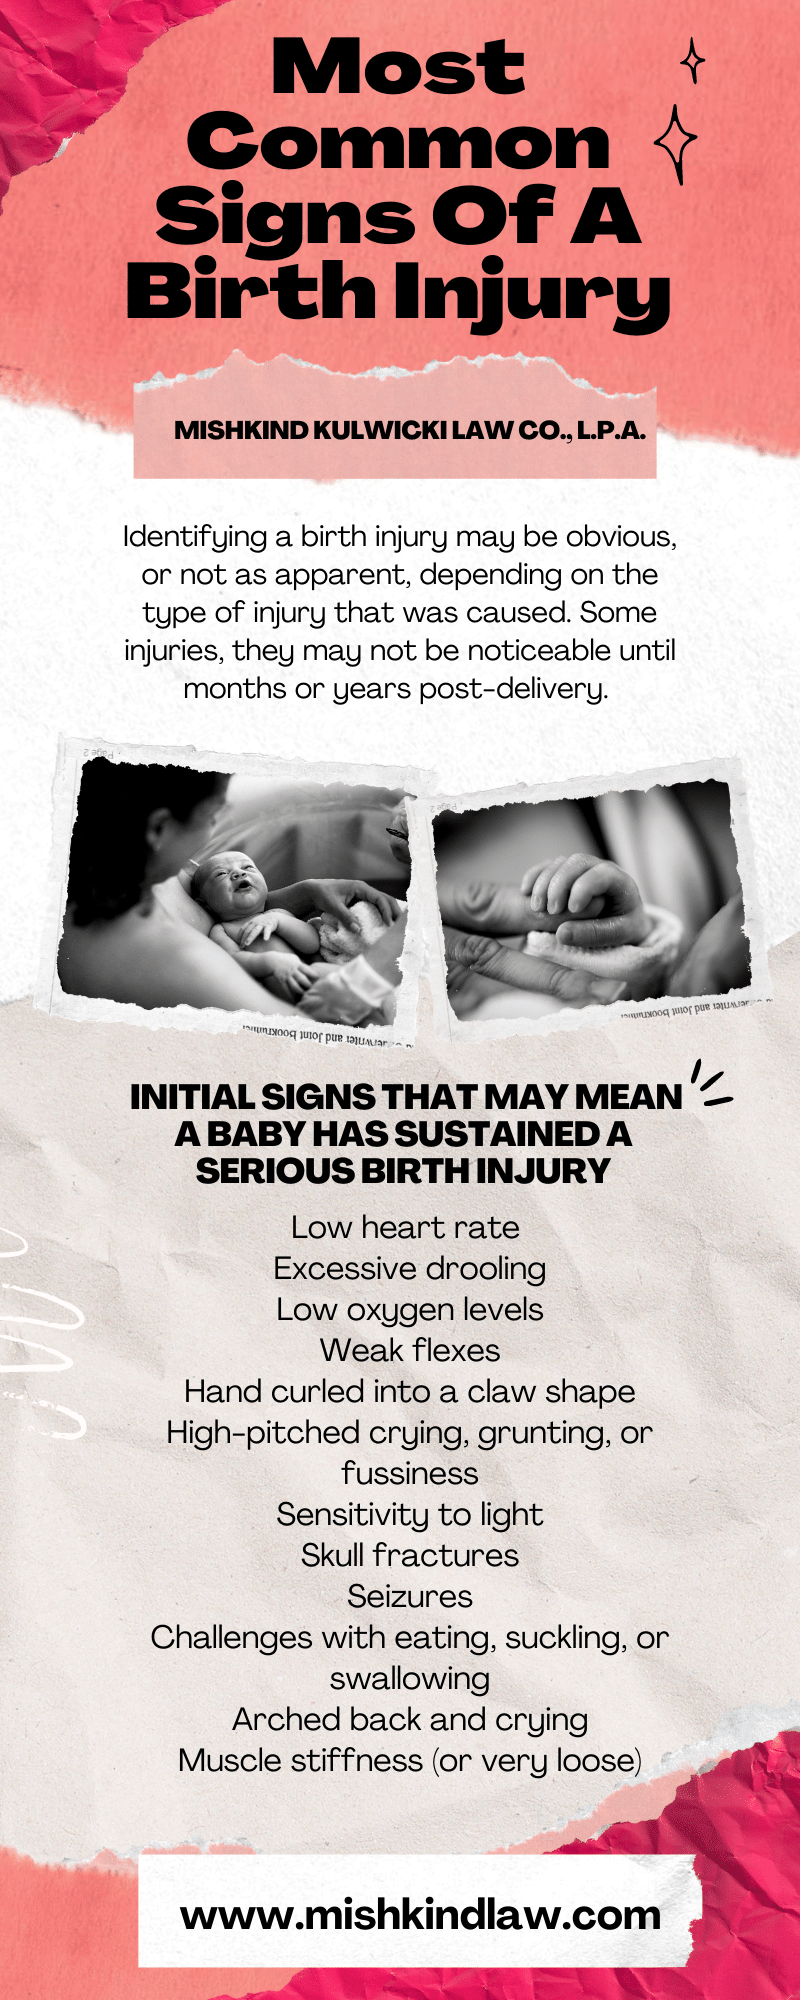 Most Common Signs of a Birth Injury Infographic